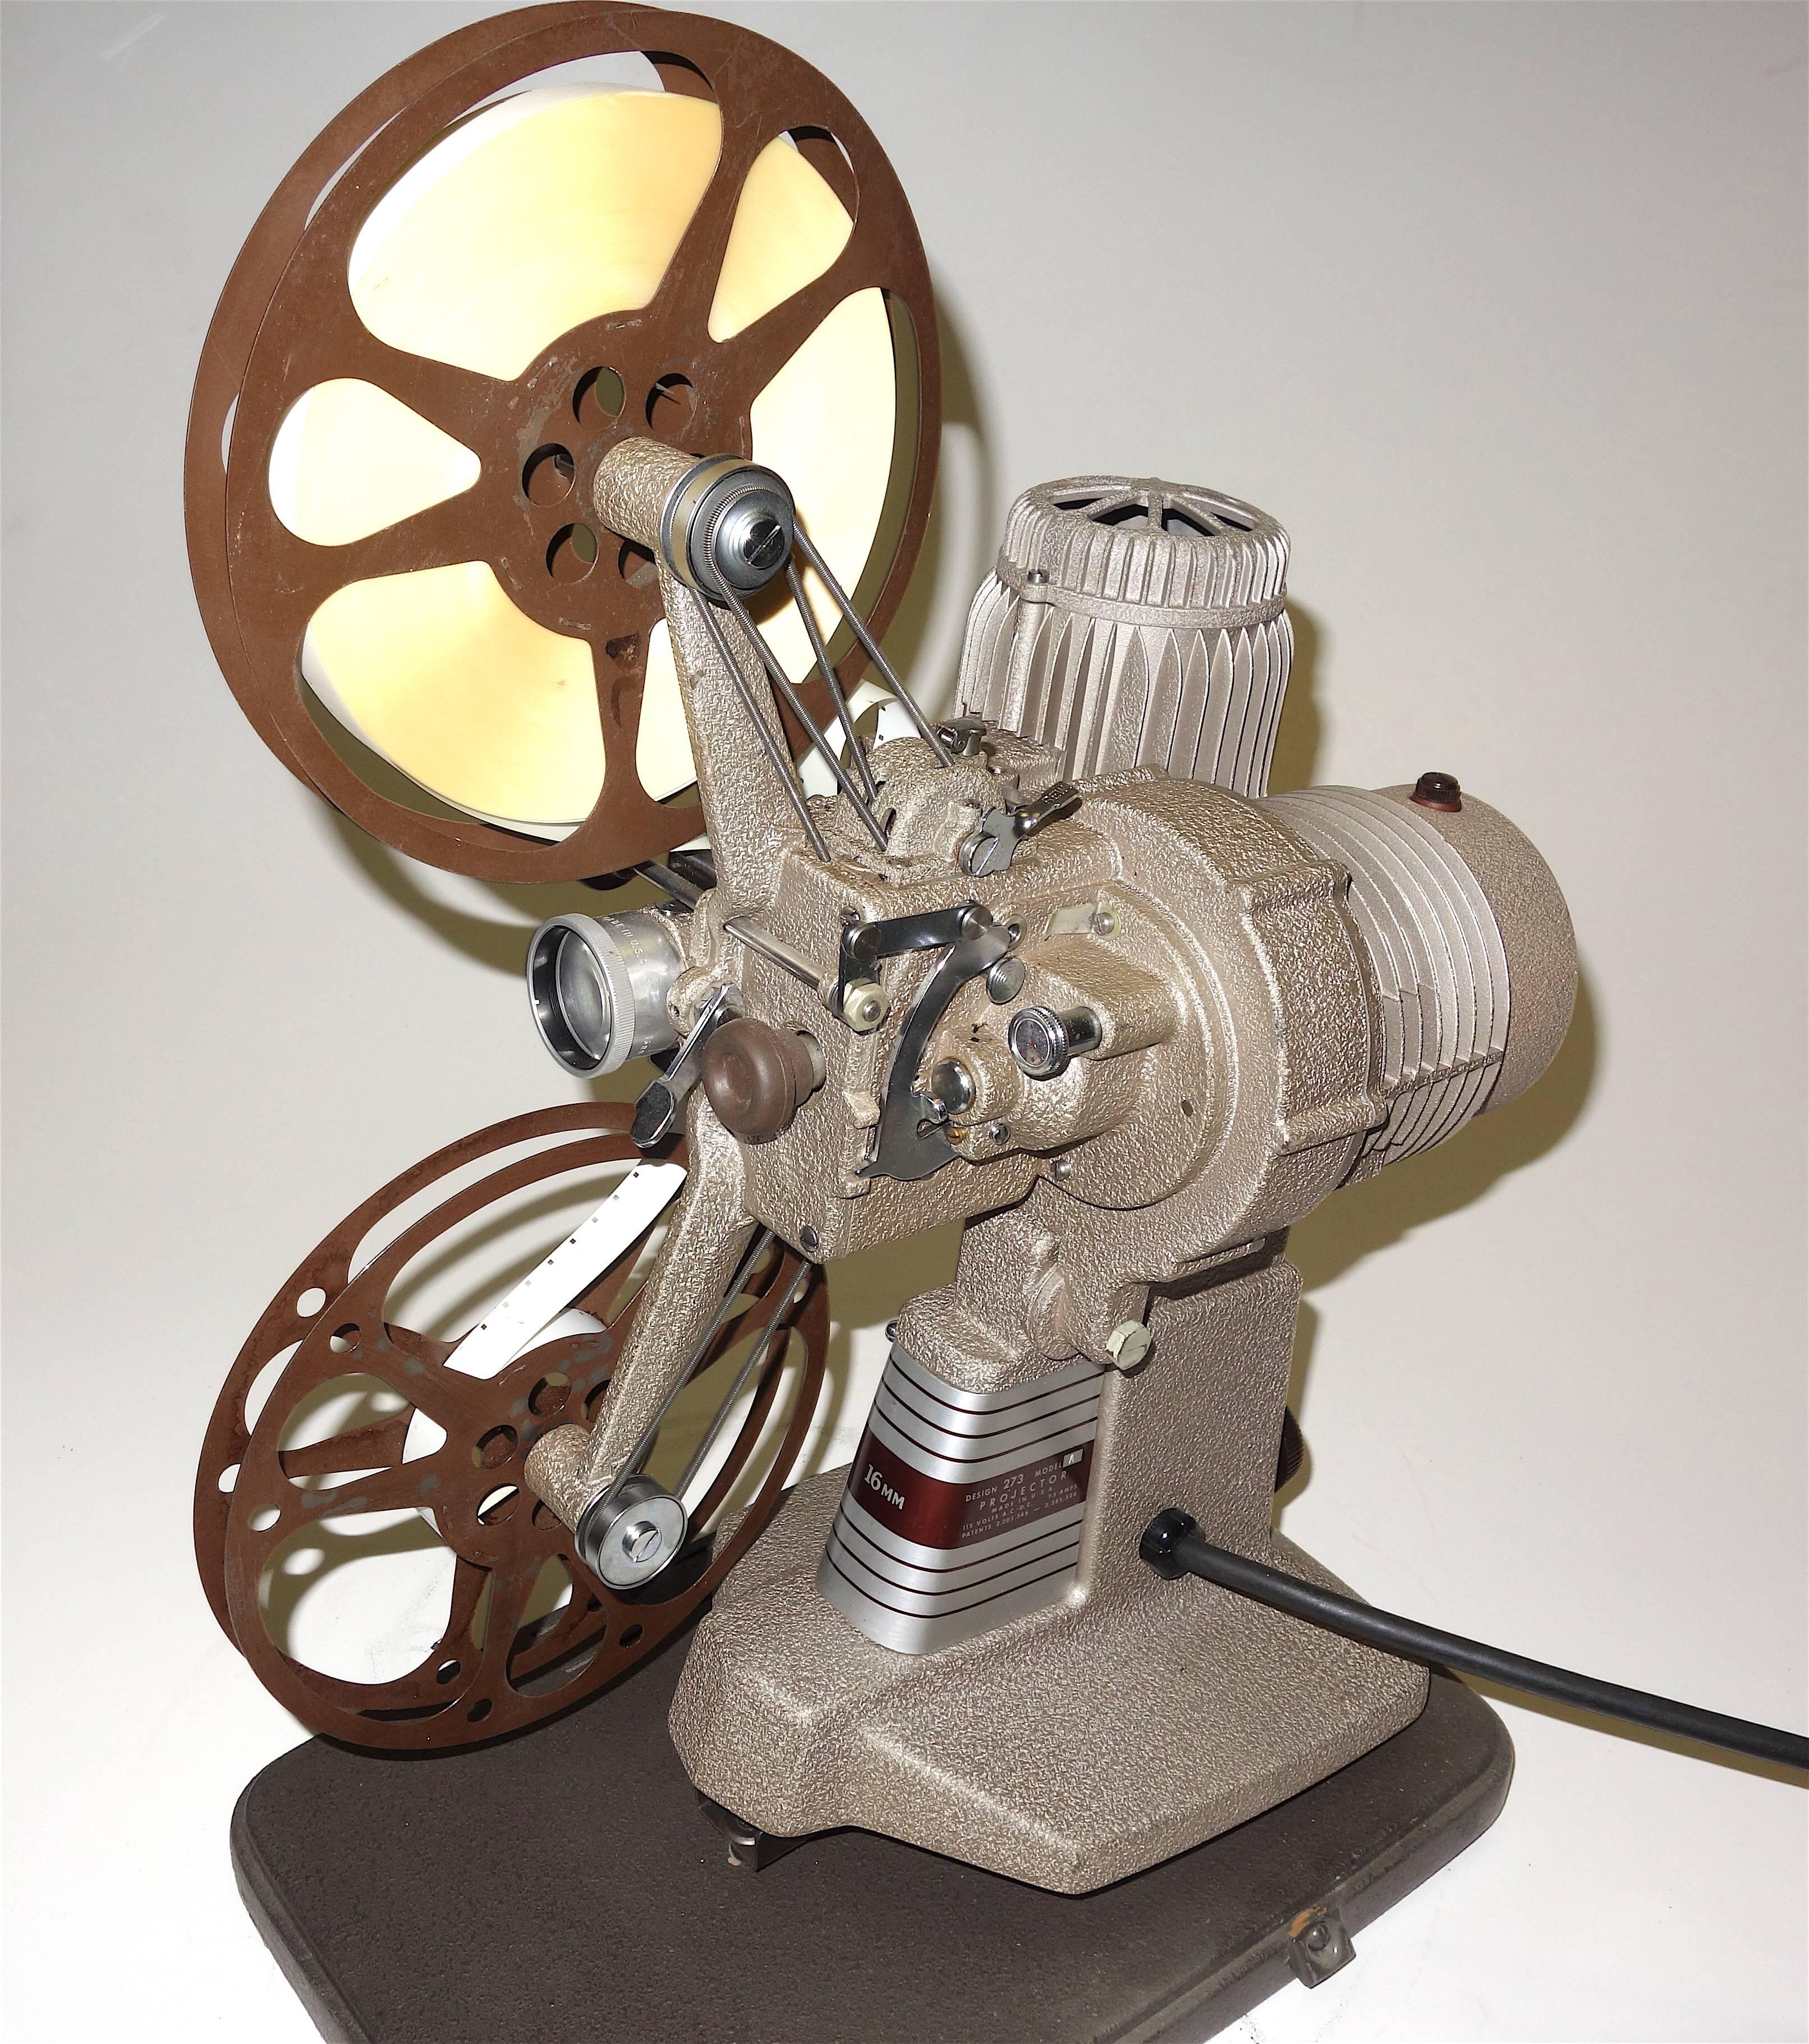 Metal 16mm Movie Projector, circa 1940, Rare Sculpture for Media Room For Sale